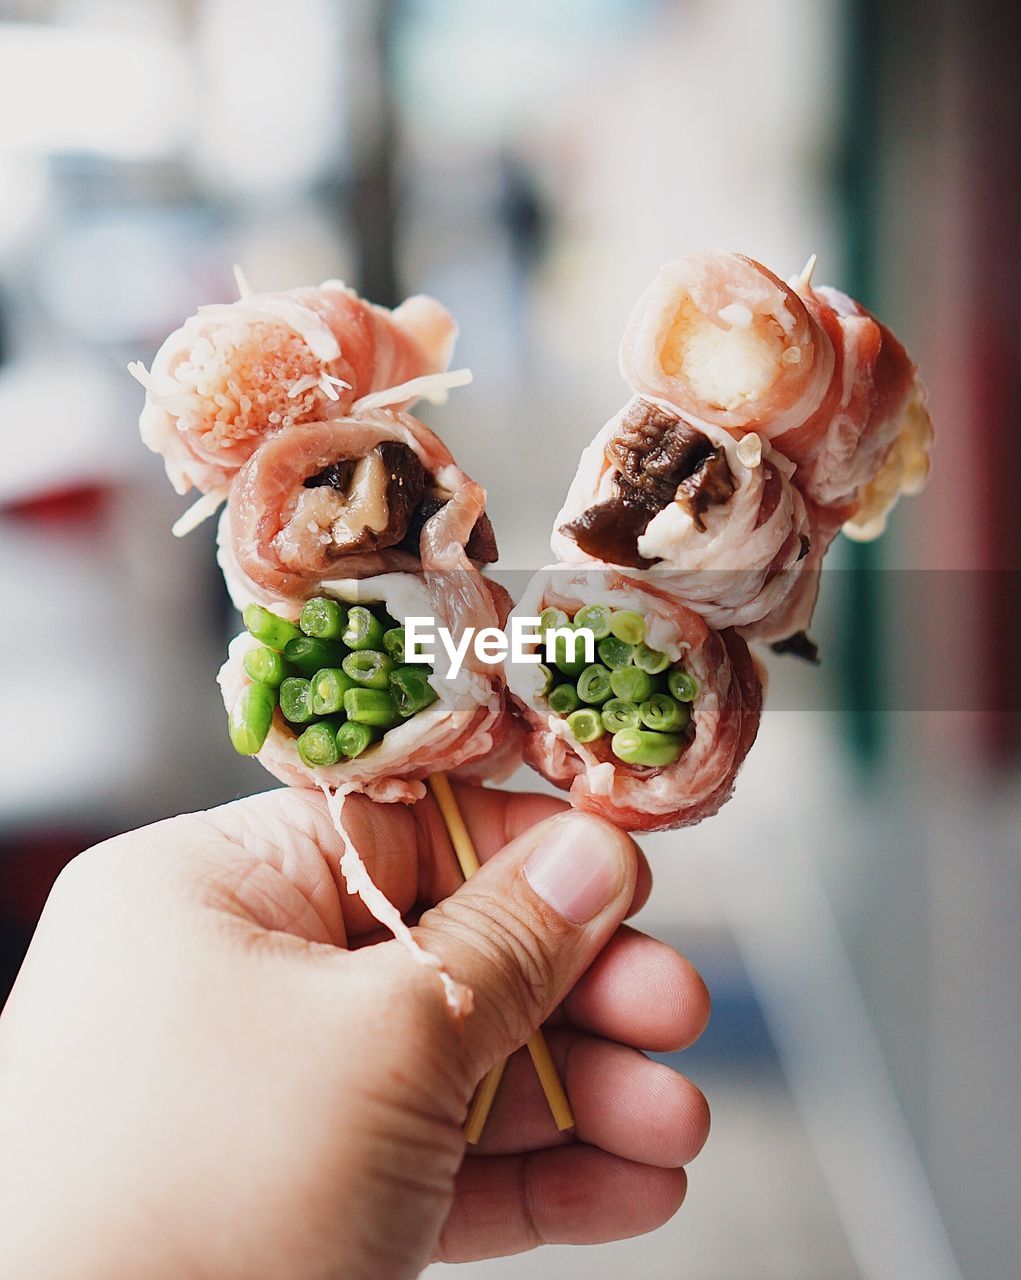 Cropped hand of man holding skewer meat rolls